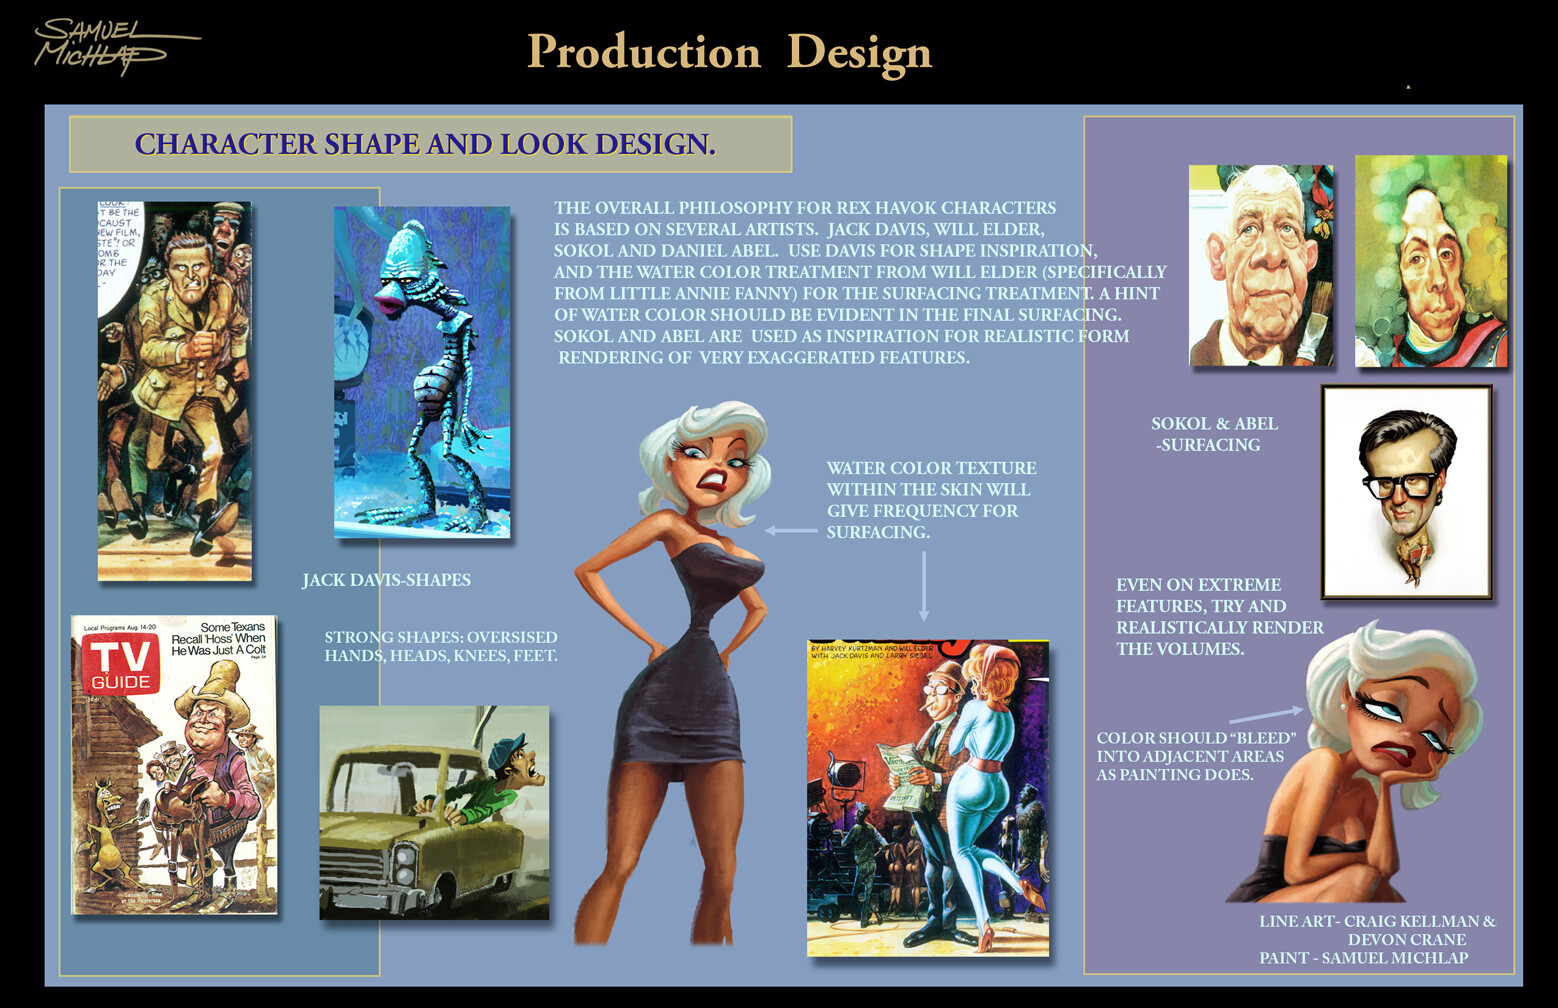 As a PD, style guides are essential to the process of making an animated feature. The guides help explain the film rules. In this case character design.